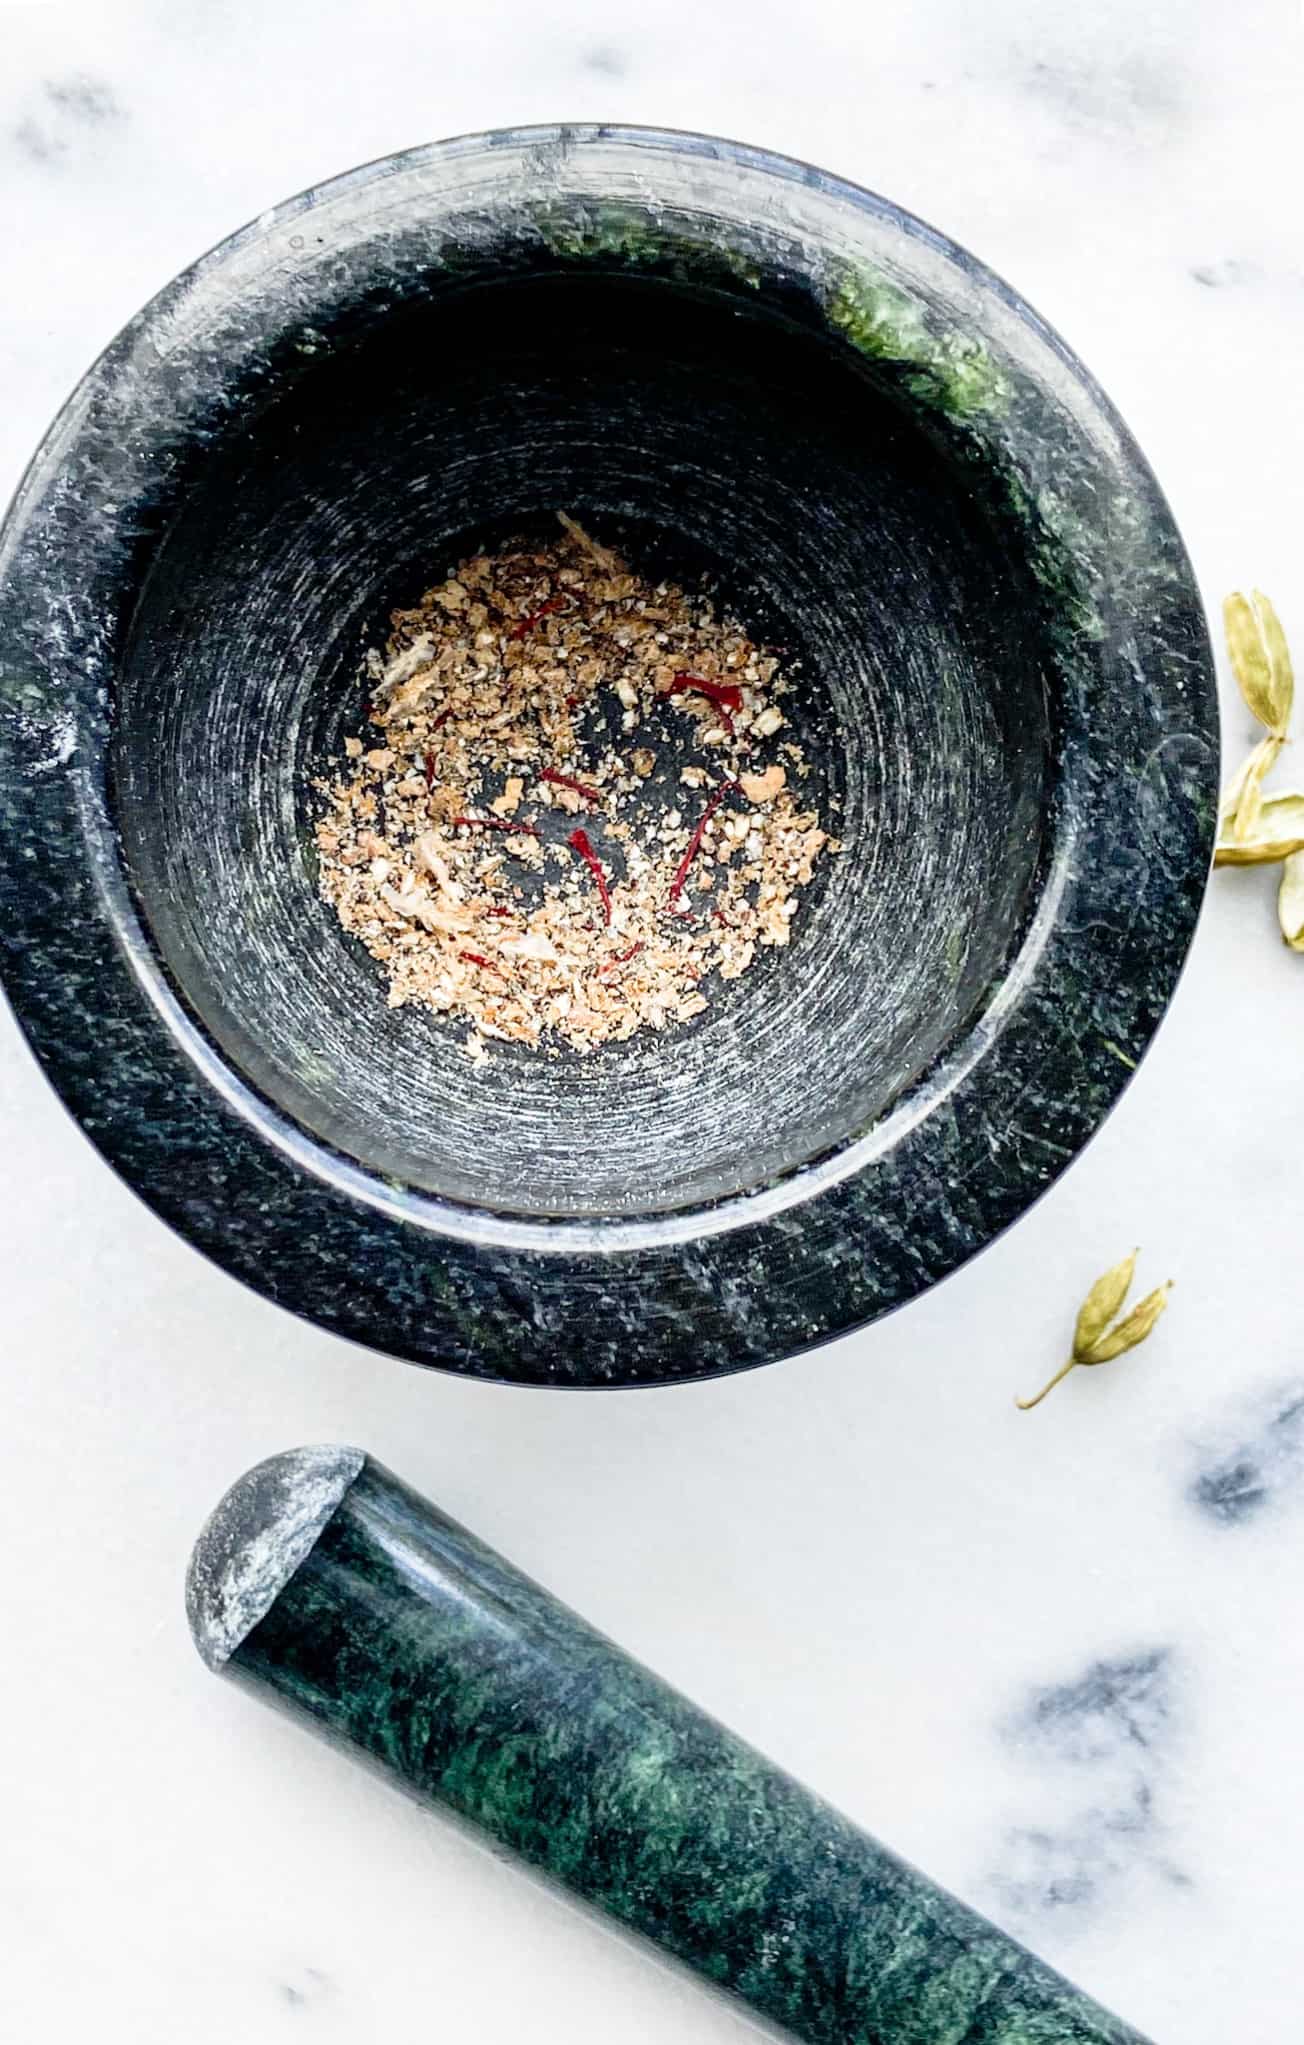 Mortar and pestle with ground spices